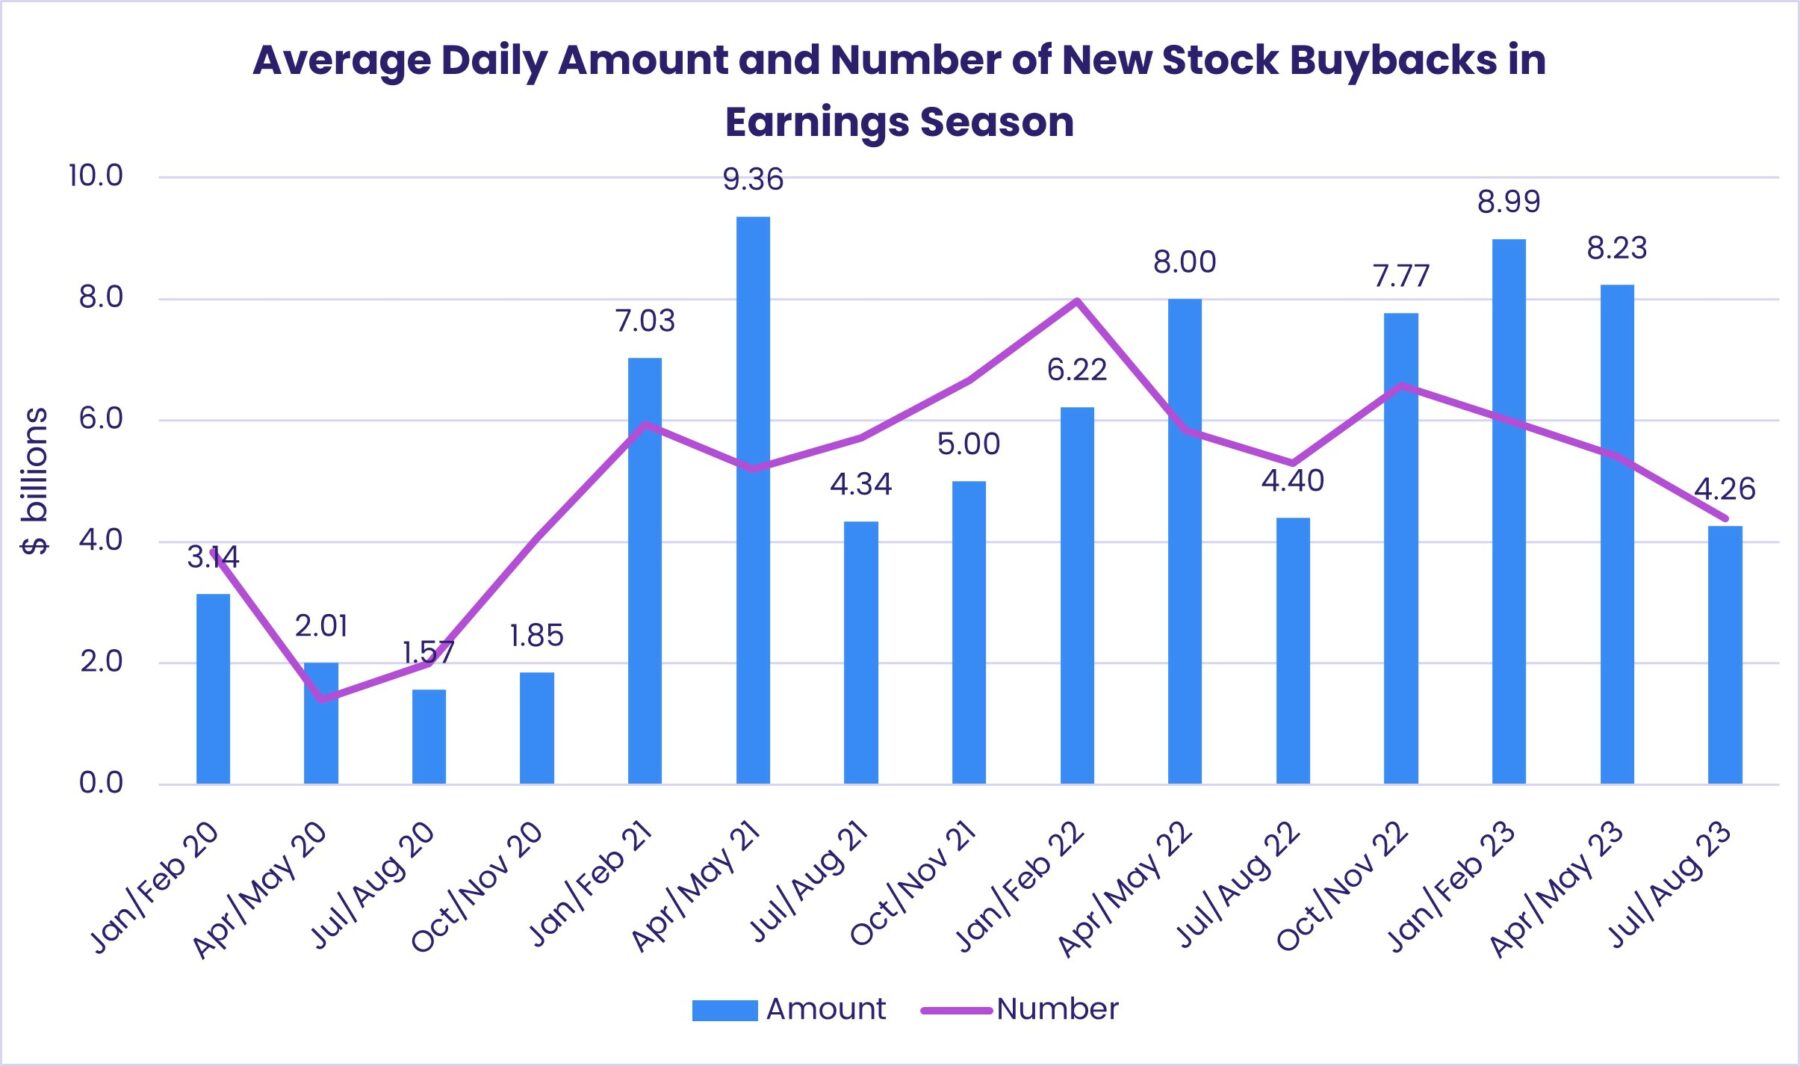 Image of a chart representing "Average Daily Amount and Number of New Stock Buybacks in Earnings Season"